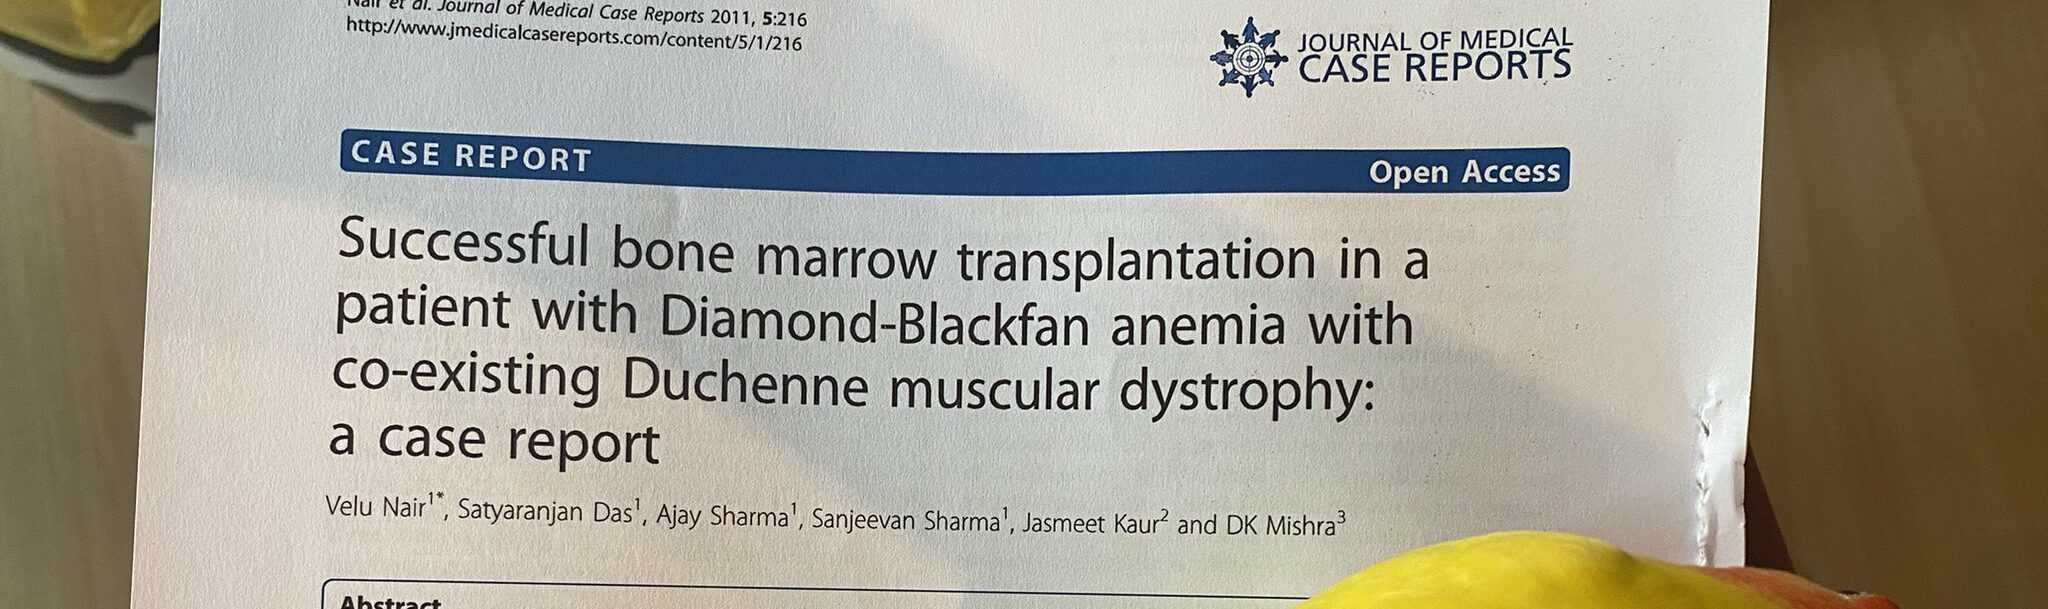 Successful bone marrow transplantation in a patient with Diamond-Blackfan anemia with co-existing Duchenne muscular dystrophy: a case report